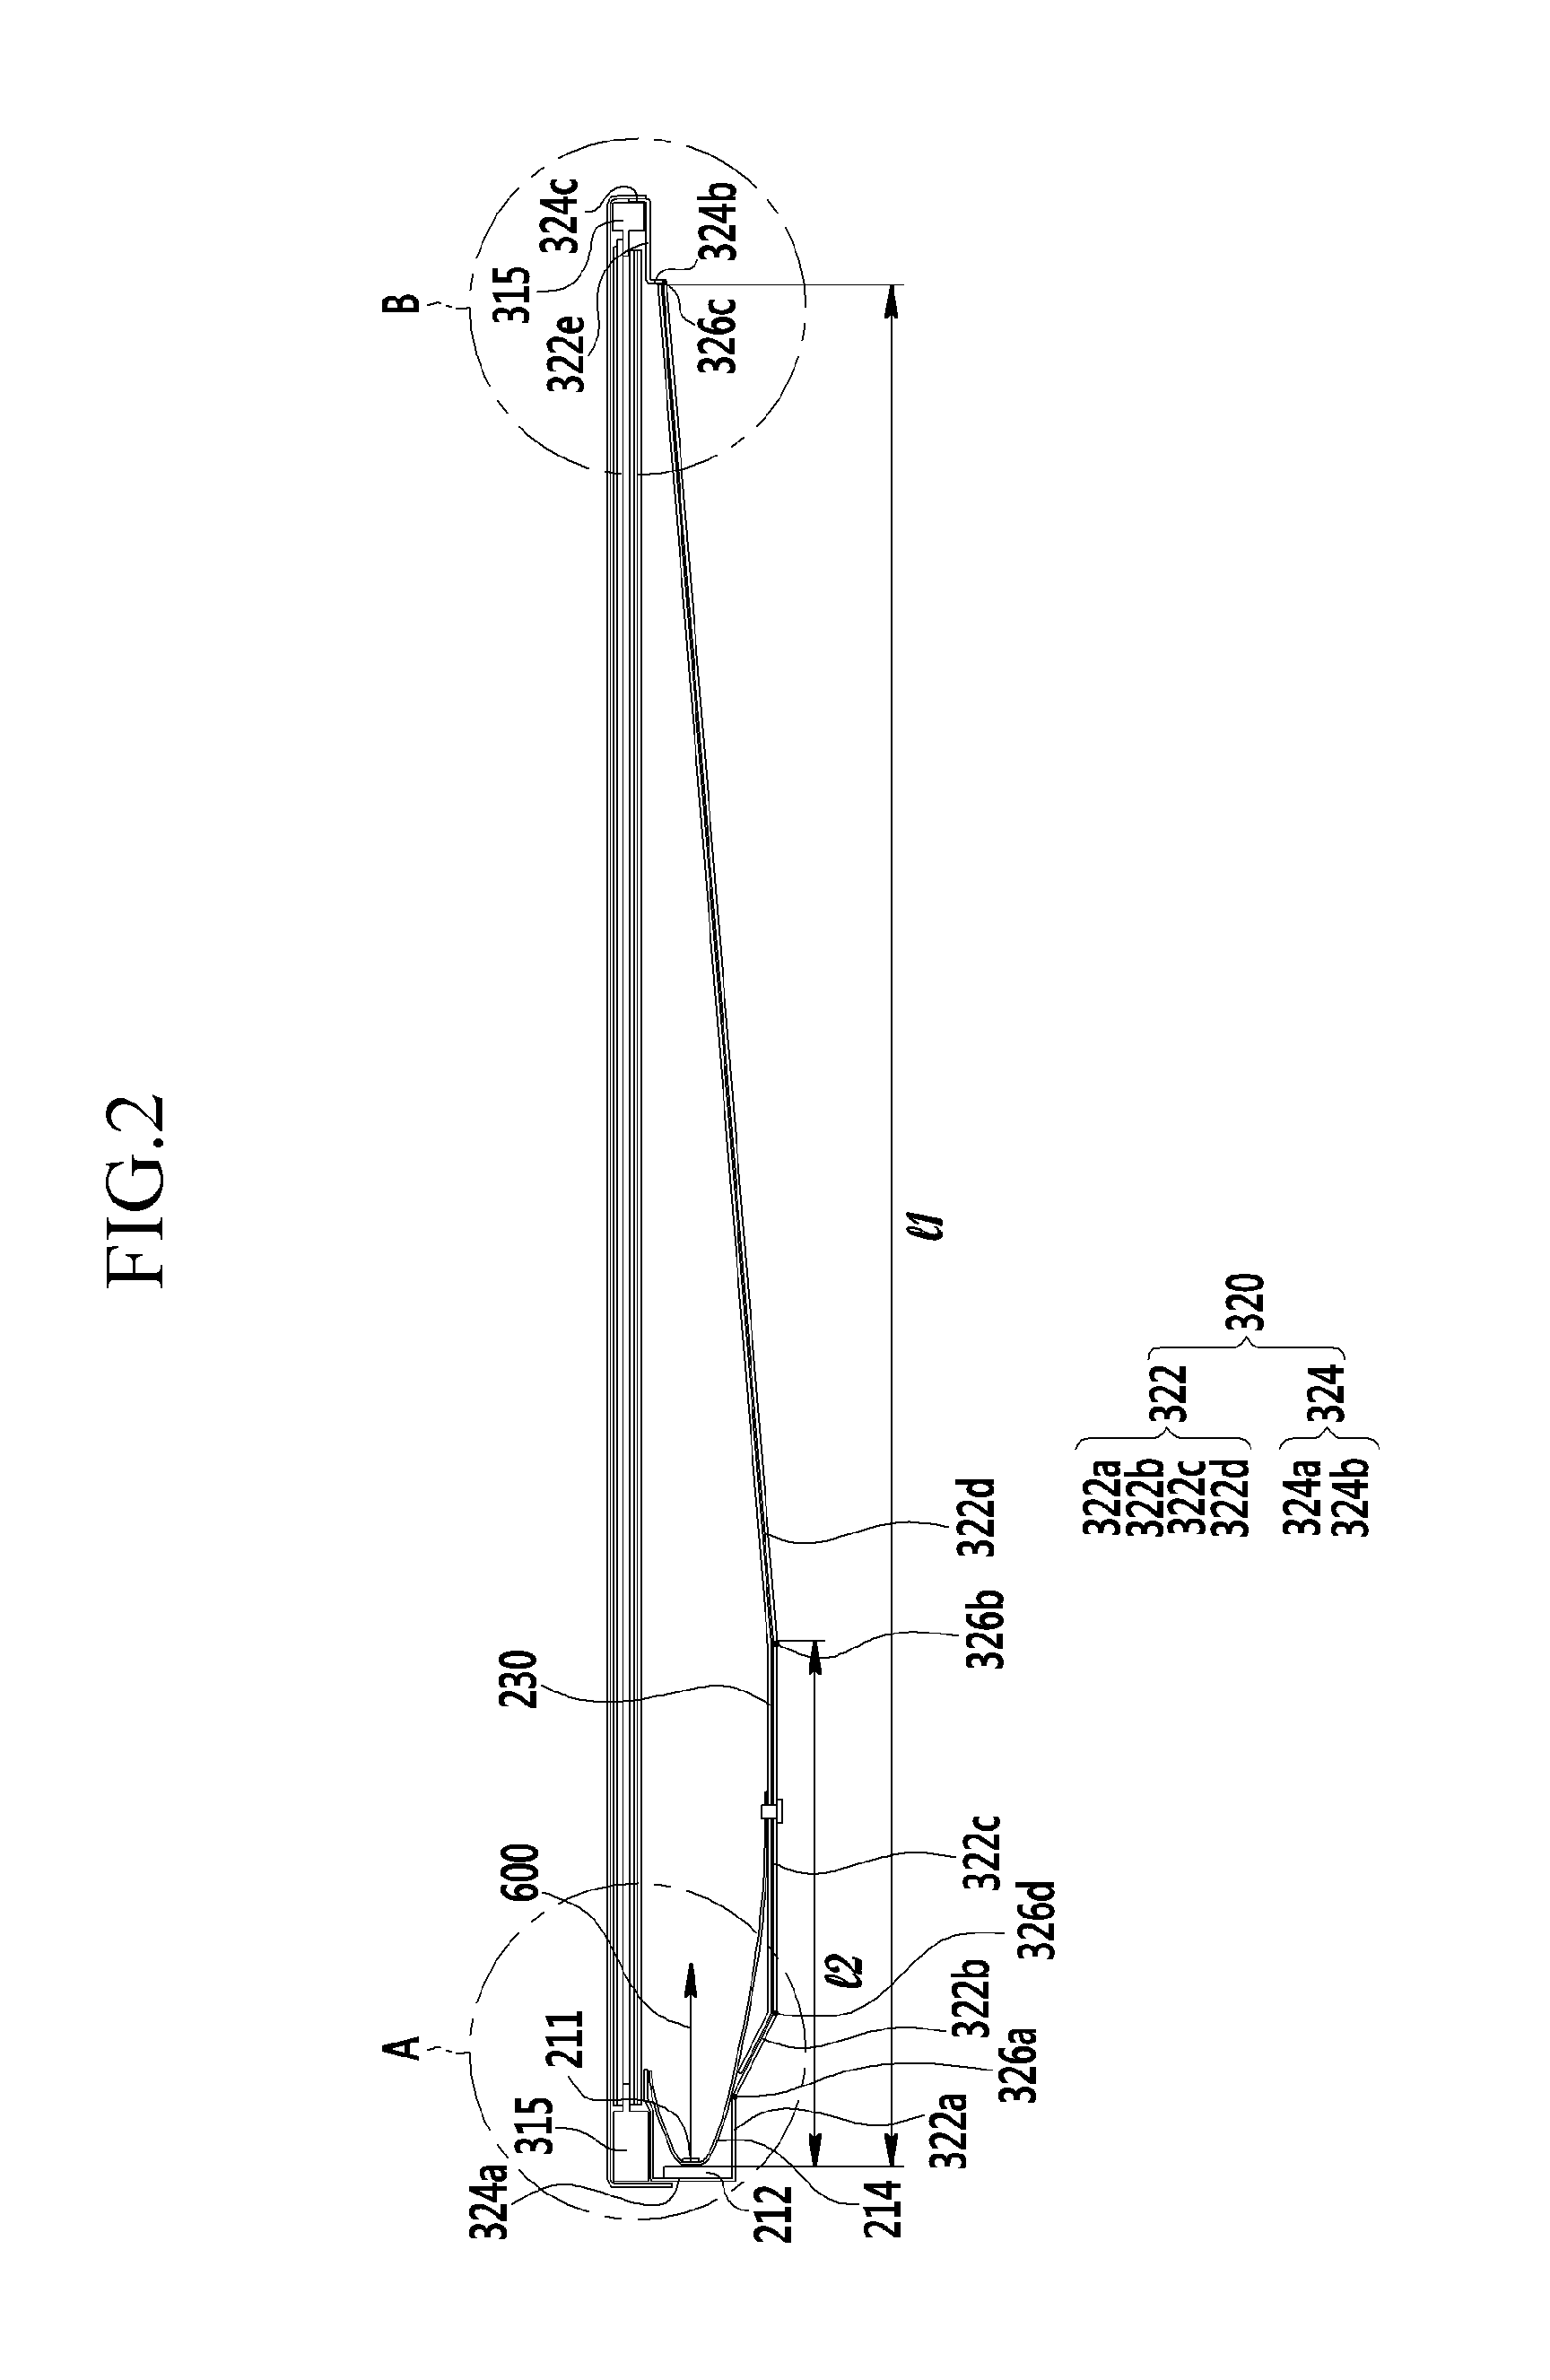 Display device comprising the same